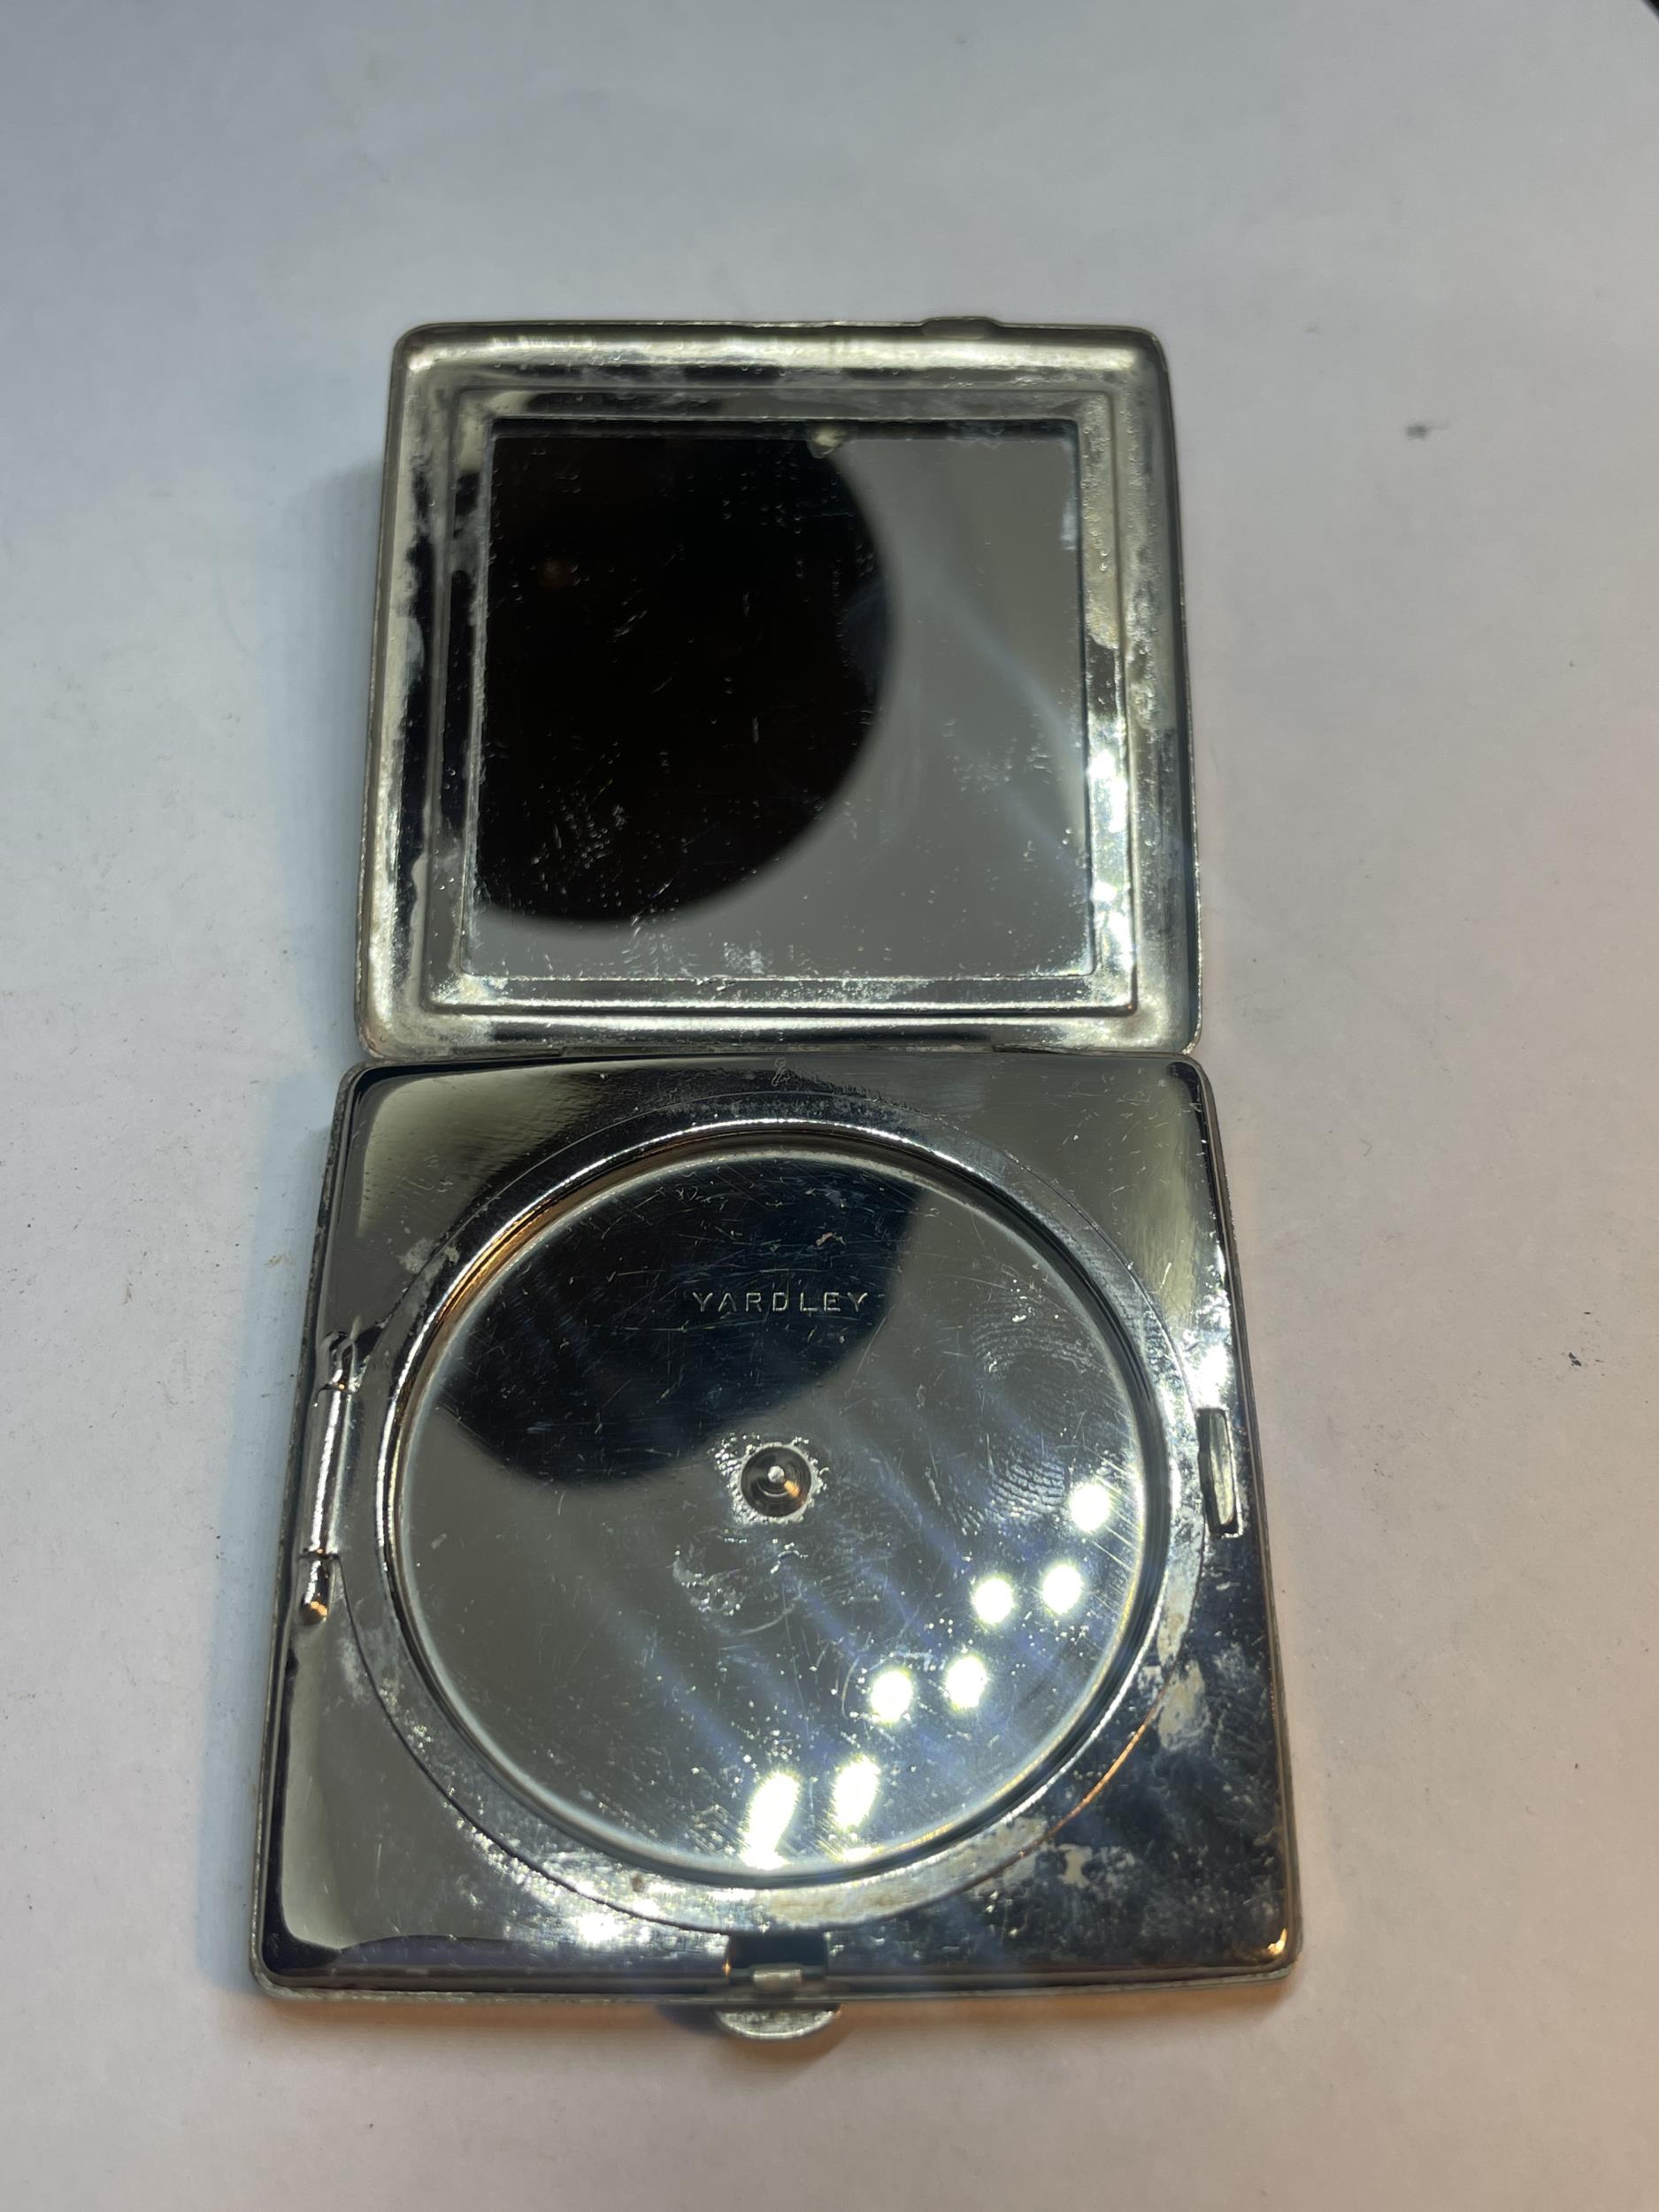 A VINTAGE YARDLEY POWDER COMPACT WITH INNER MIRROR - Image 2 of 4